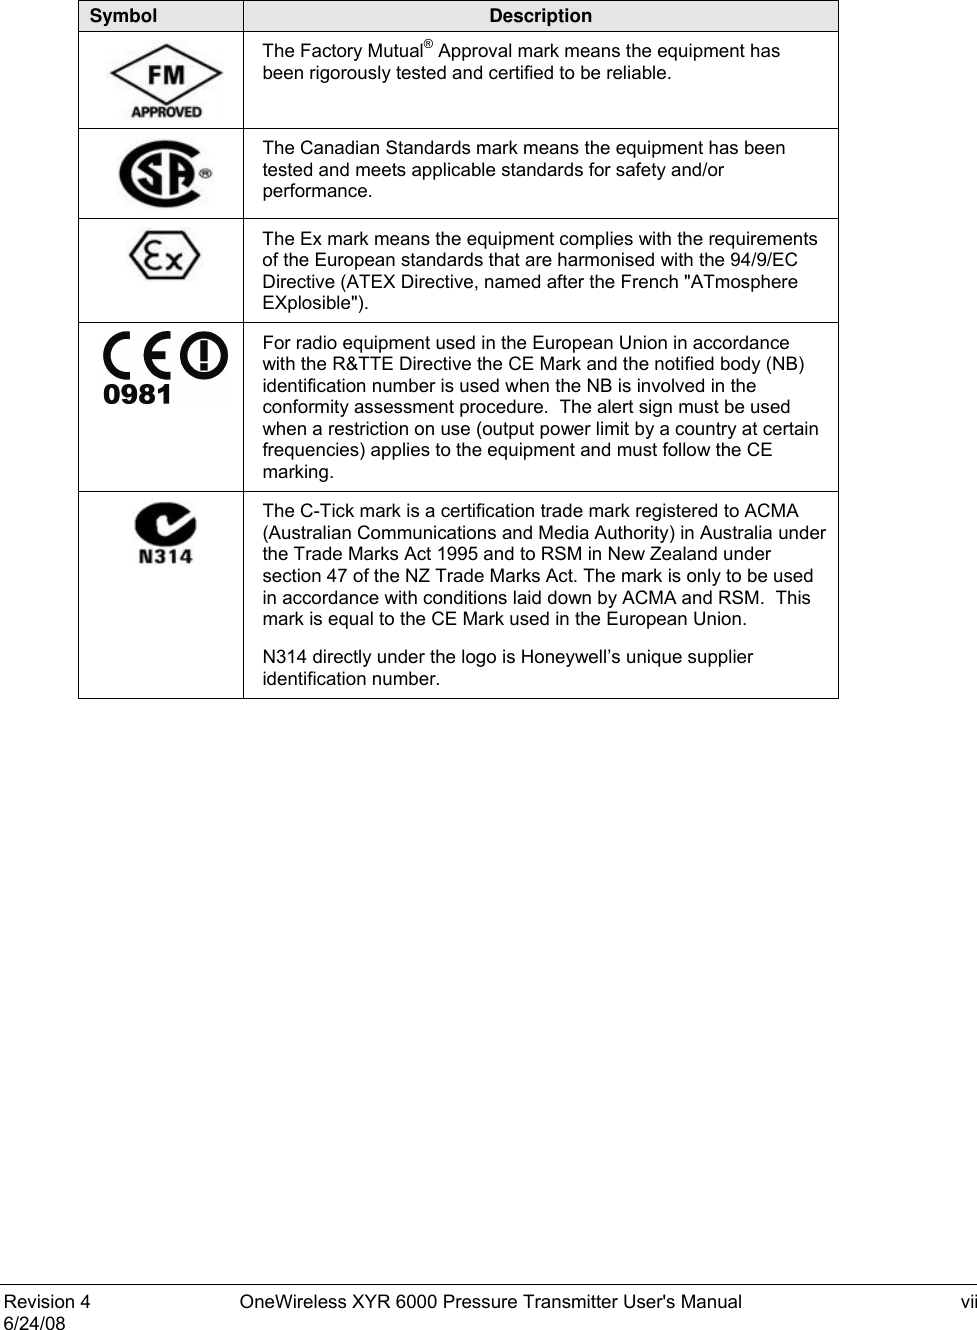  Revision 4  OneWireless XYR 6000 Pressure Transmitter User&apos;s Manual  vii 6/24/08    Symbol  Description  The Factory Mutual® Approval mark means the equipment has been rigorously tested and certified to be reliable.   The Canadian Standards mark means the equipment has been tested and meets applicable standards for safety and/or performance.  The Ex mark means the equipment complies with the requirements of the European standards that are harmonised with the 94/9/EC Directive (ATEX Directive, named after the French &quot;ATmosphere EXplosible&quot;).  For radio equipment used in the European Union in accordance with the R&amp;TTE Directive the CE Mark and the notified body (NB) identification number is used when the NB is involved in the conformity assessment procedure.  The alert sign must be used when a restriction on use (output power limit by a country at certain frequencies) applies to the equipment and must follow the CE marking.  The C-Tick mark is a certification trade mark registered to ACMA (Australian Communications and Media Authority) in Australia under the Trade Marks Act 1995 and to RSM in New Zealand under section 47 of the NZ Trade Marks Act. The mark is only to be used in accordance with conditions laid down by ACMA and RSM.  This mark is equal to the CE Mark used in the European Union.  N314 directly under the logo is Honeywell’s unique supplier identification number.  